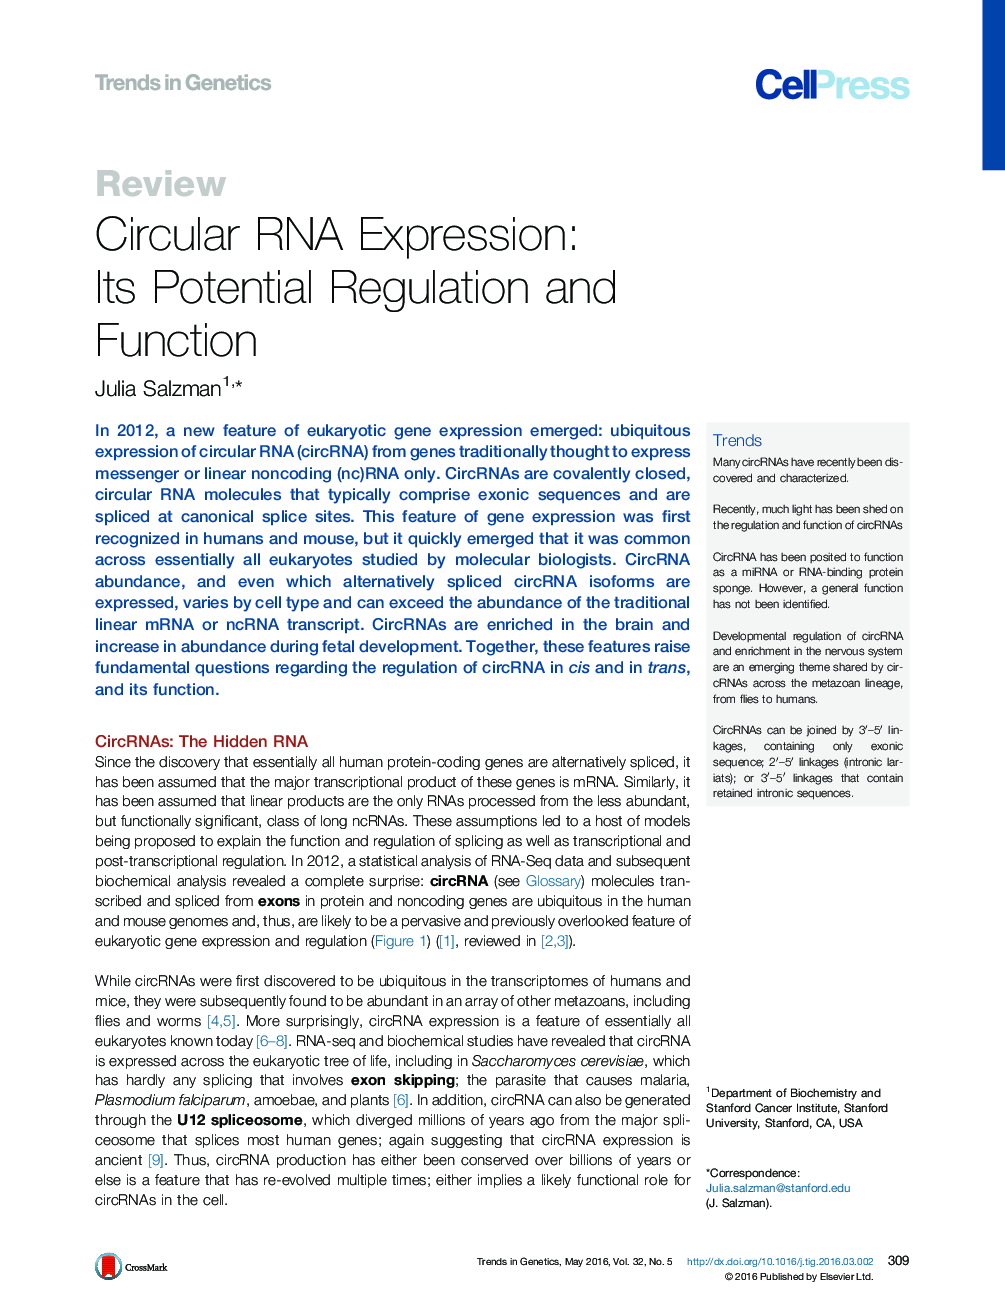 Circular RNA Expression: Its Potential Regulation and Function